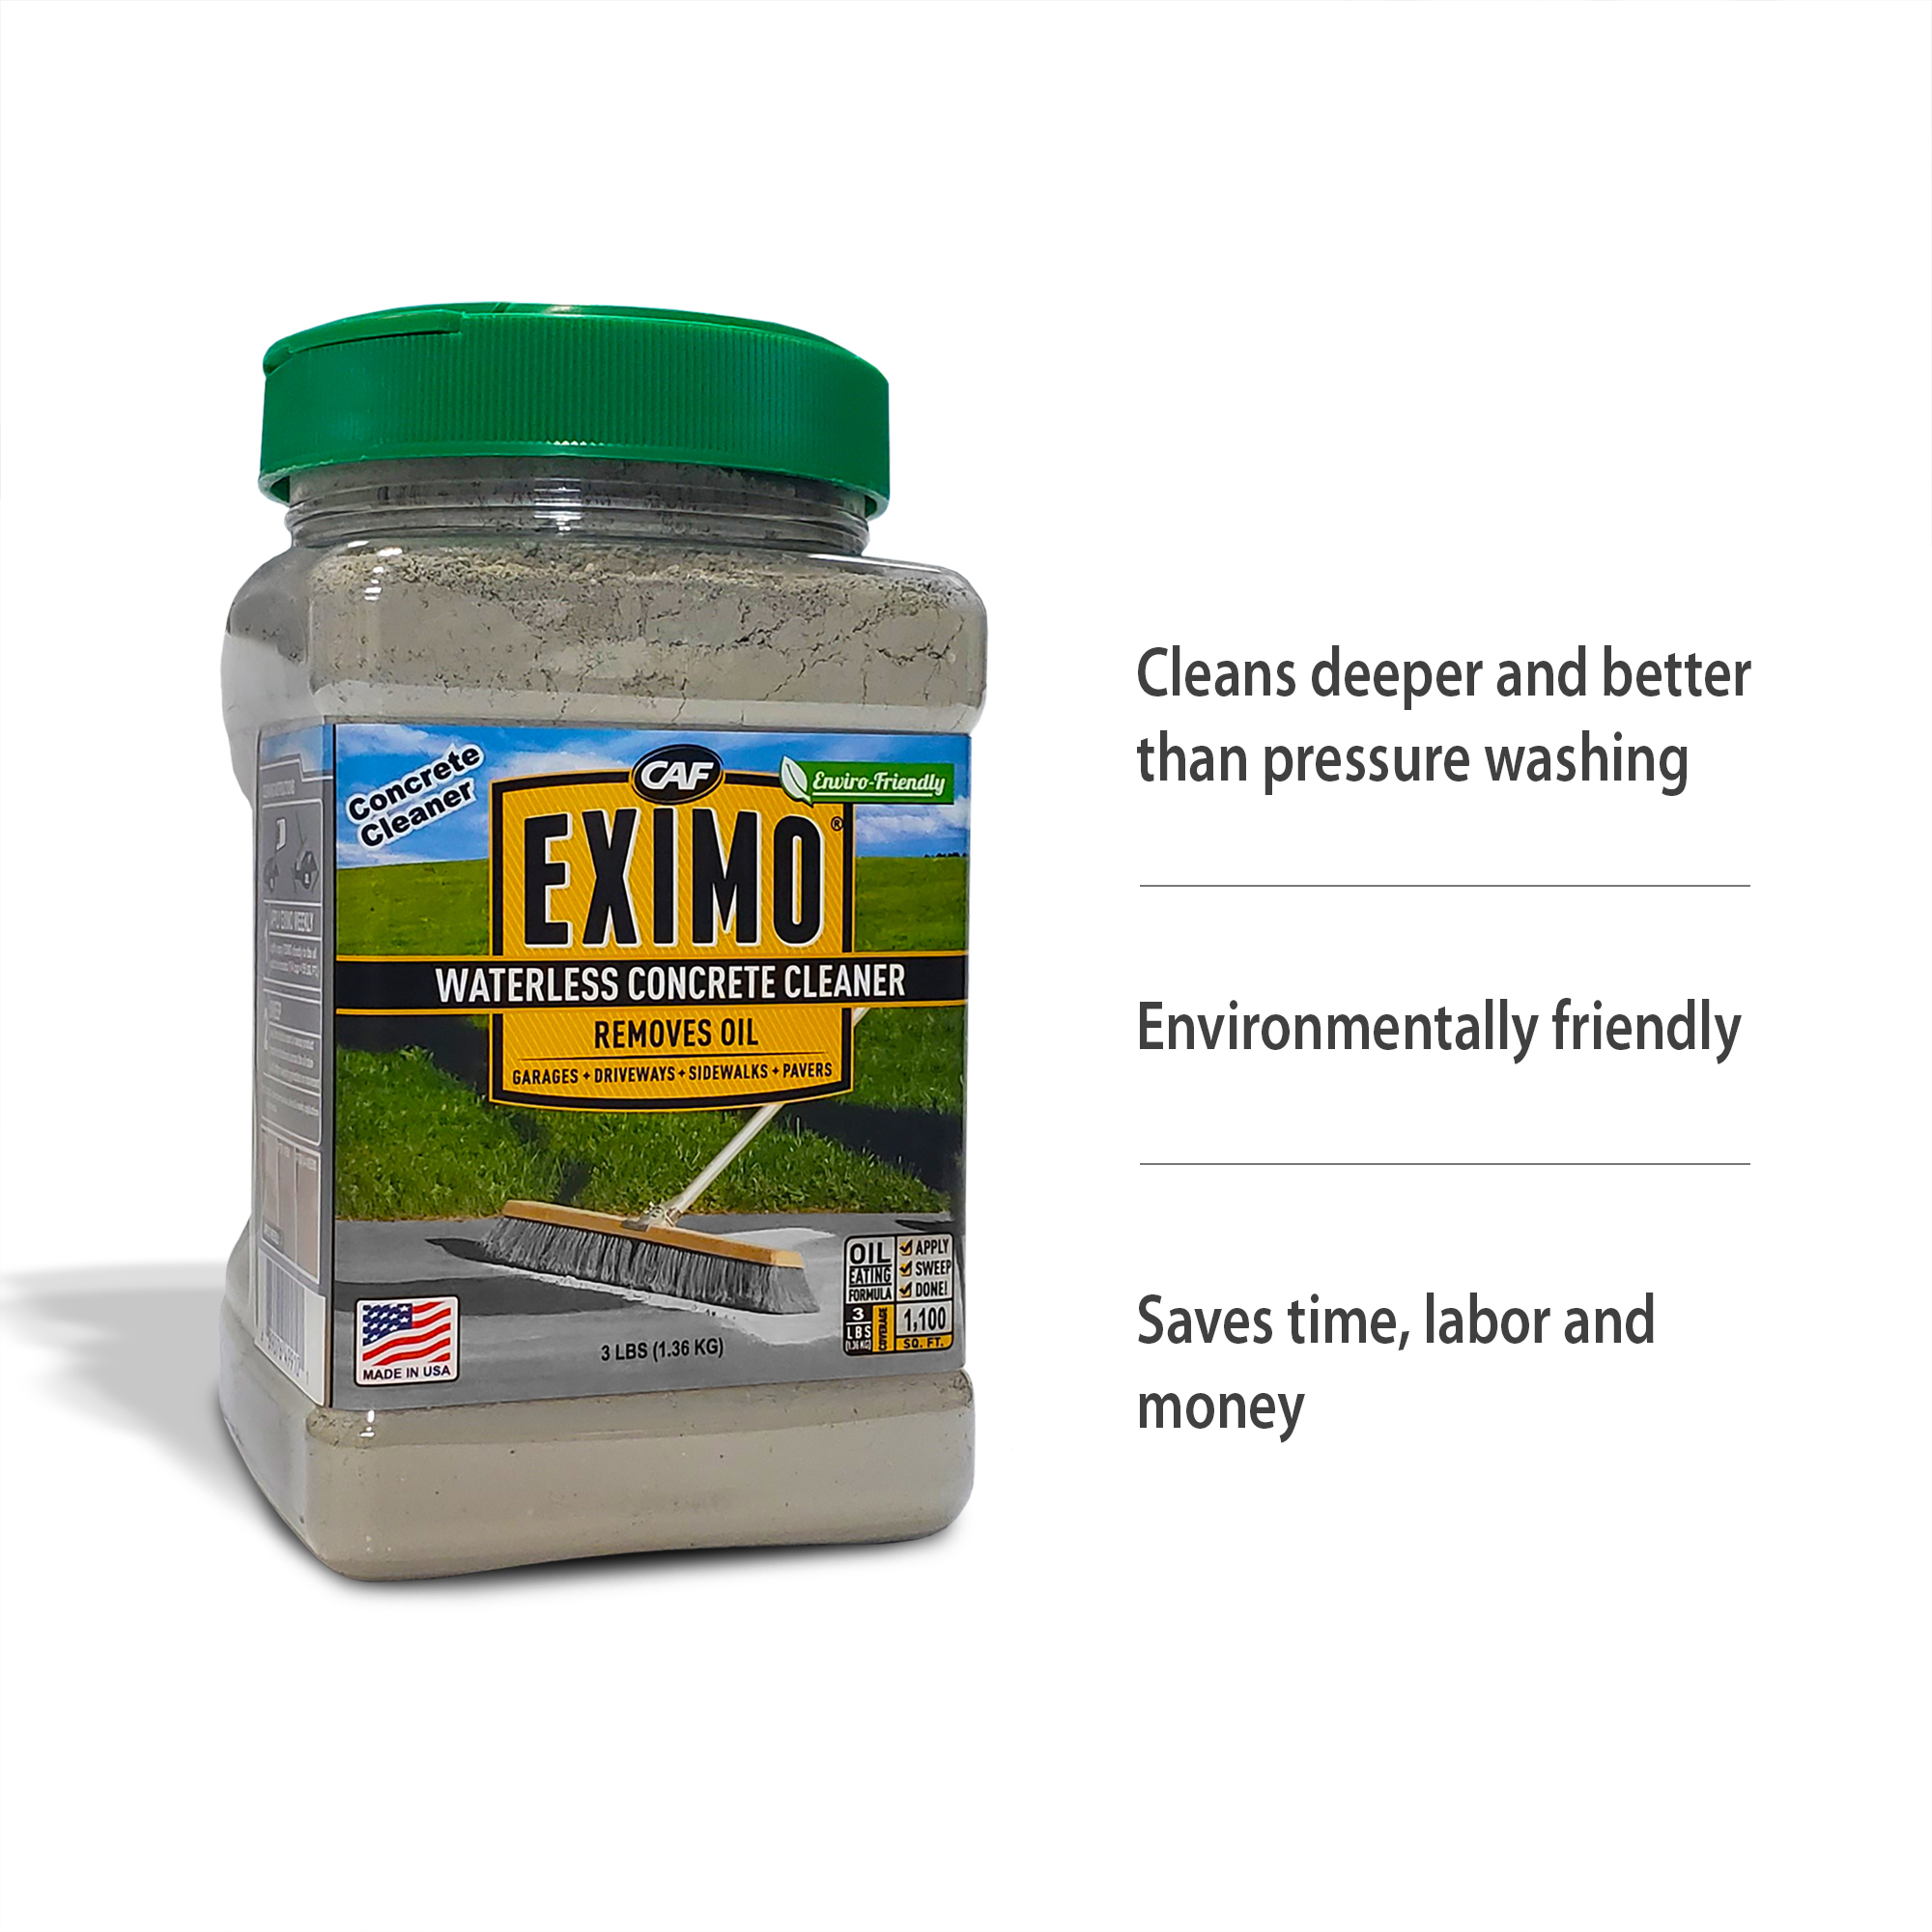 EXIMO Waterless Concrete Cleaner by CAF Outdoor Cleaning for Driveway, Garage, Basement, and Walkway Surfaces, 3 lbs, Advanced Stain Remover for Oils and Other Petroleum Stains - image 5 of 8